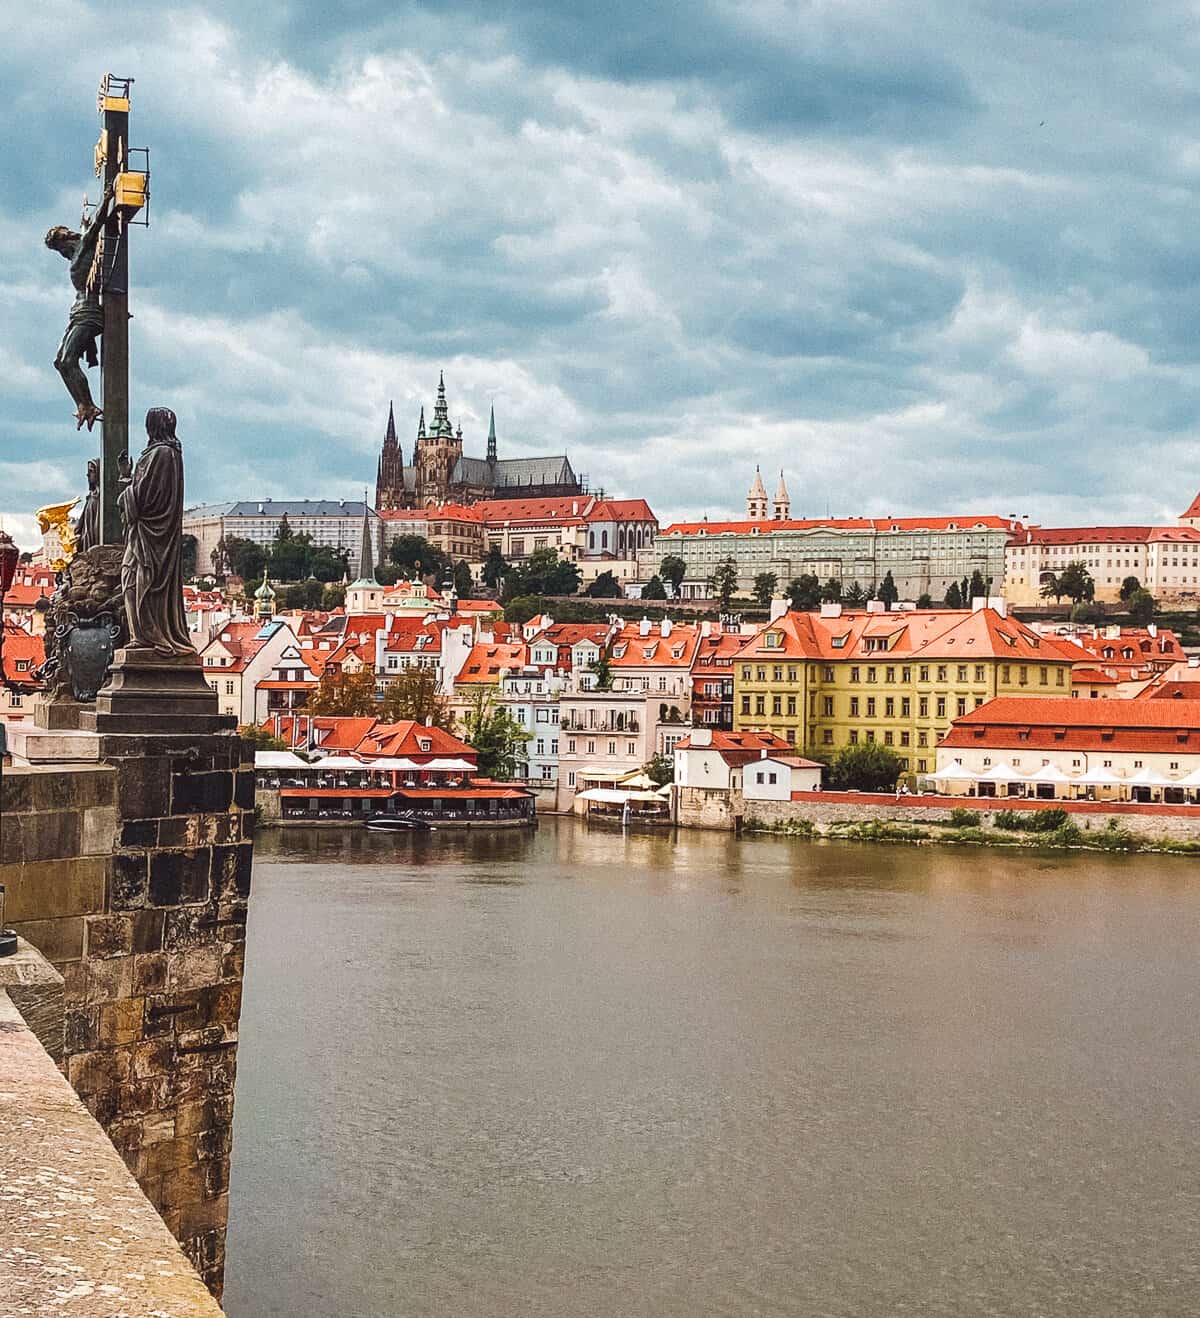 A statue on the Charles Bridge stands watch over the Vltava River, with Prague Castle rising majestically in the background, capturing the historical and cultural grandeur of Prague.